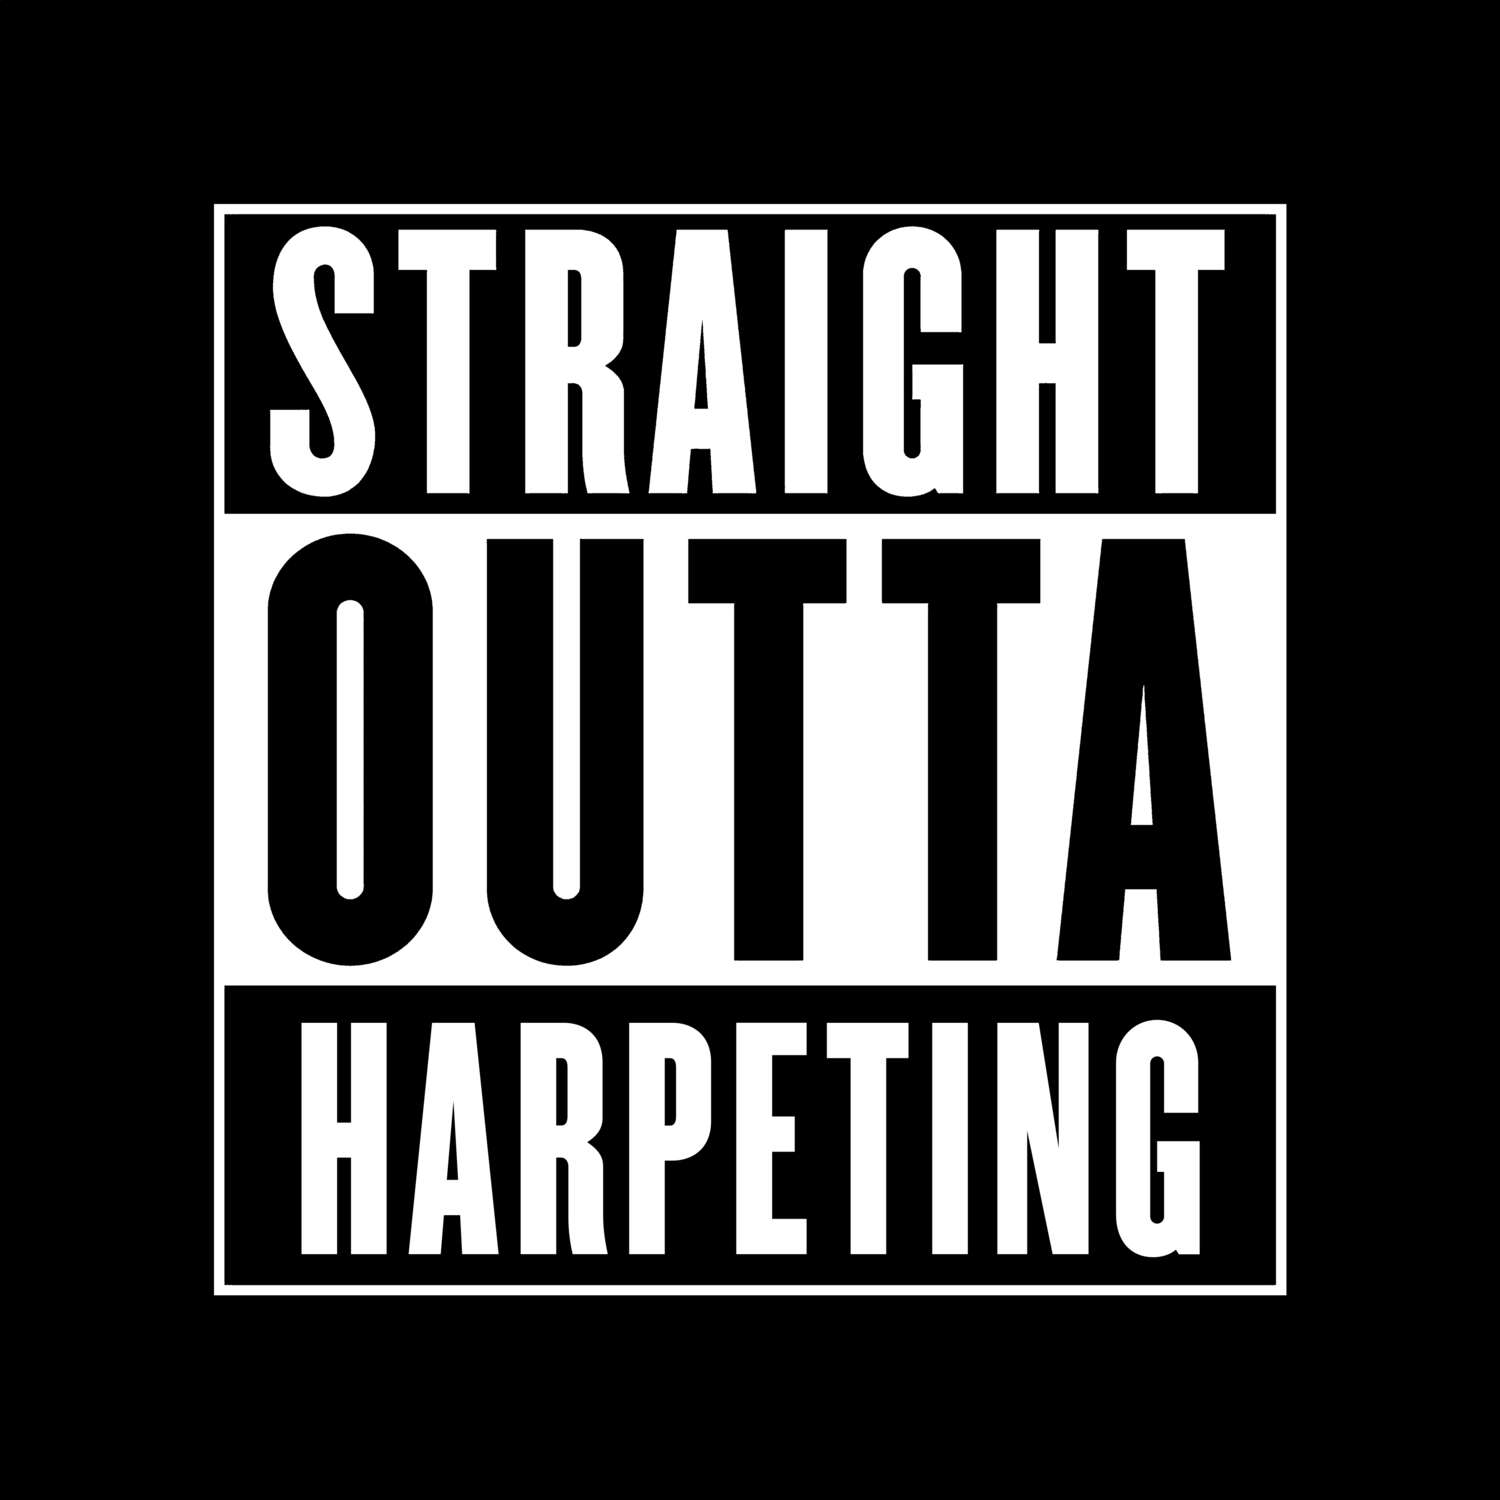 Harpeting T-Shirt »Straight Outta«